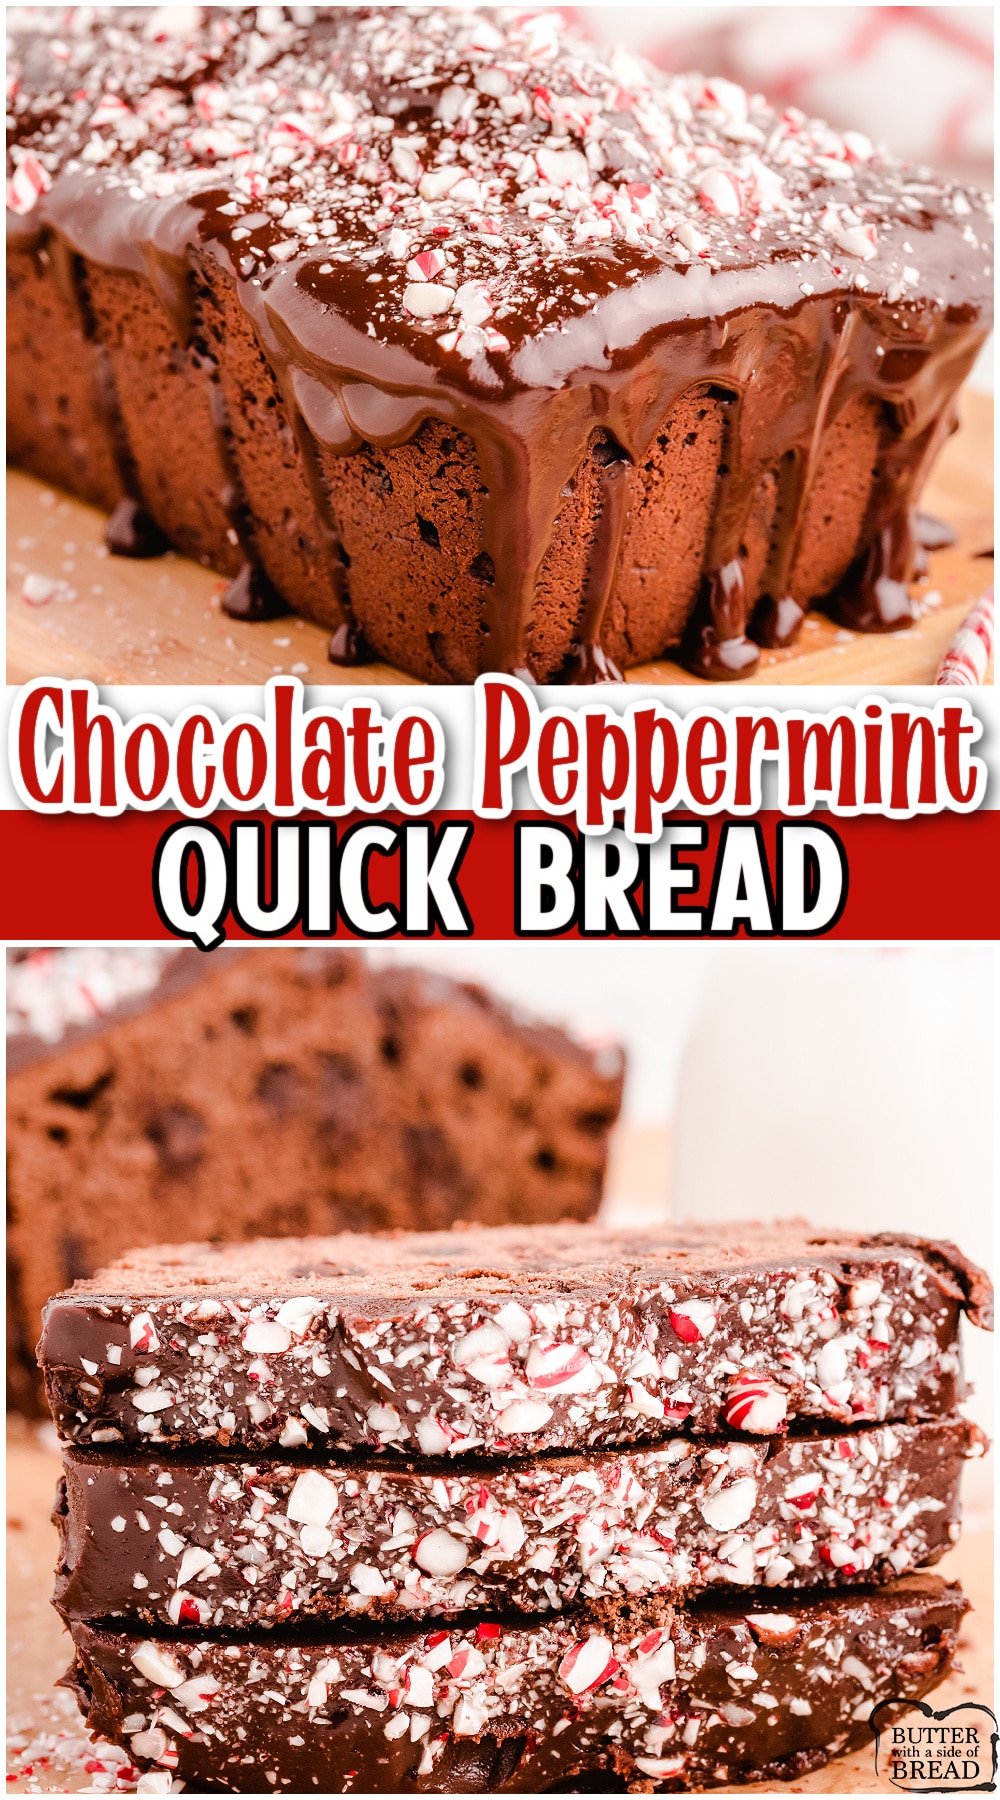 Chocolate Peppermint Bread is perfect for the holidays! Rich chocolate flavor sprinkled with peppermint makes this chocolate quick bread festive & delicious! 